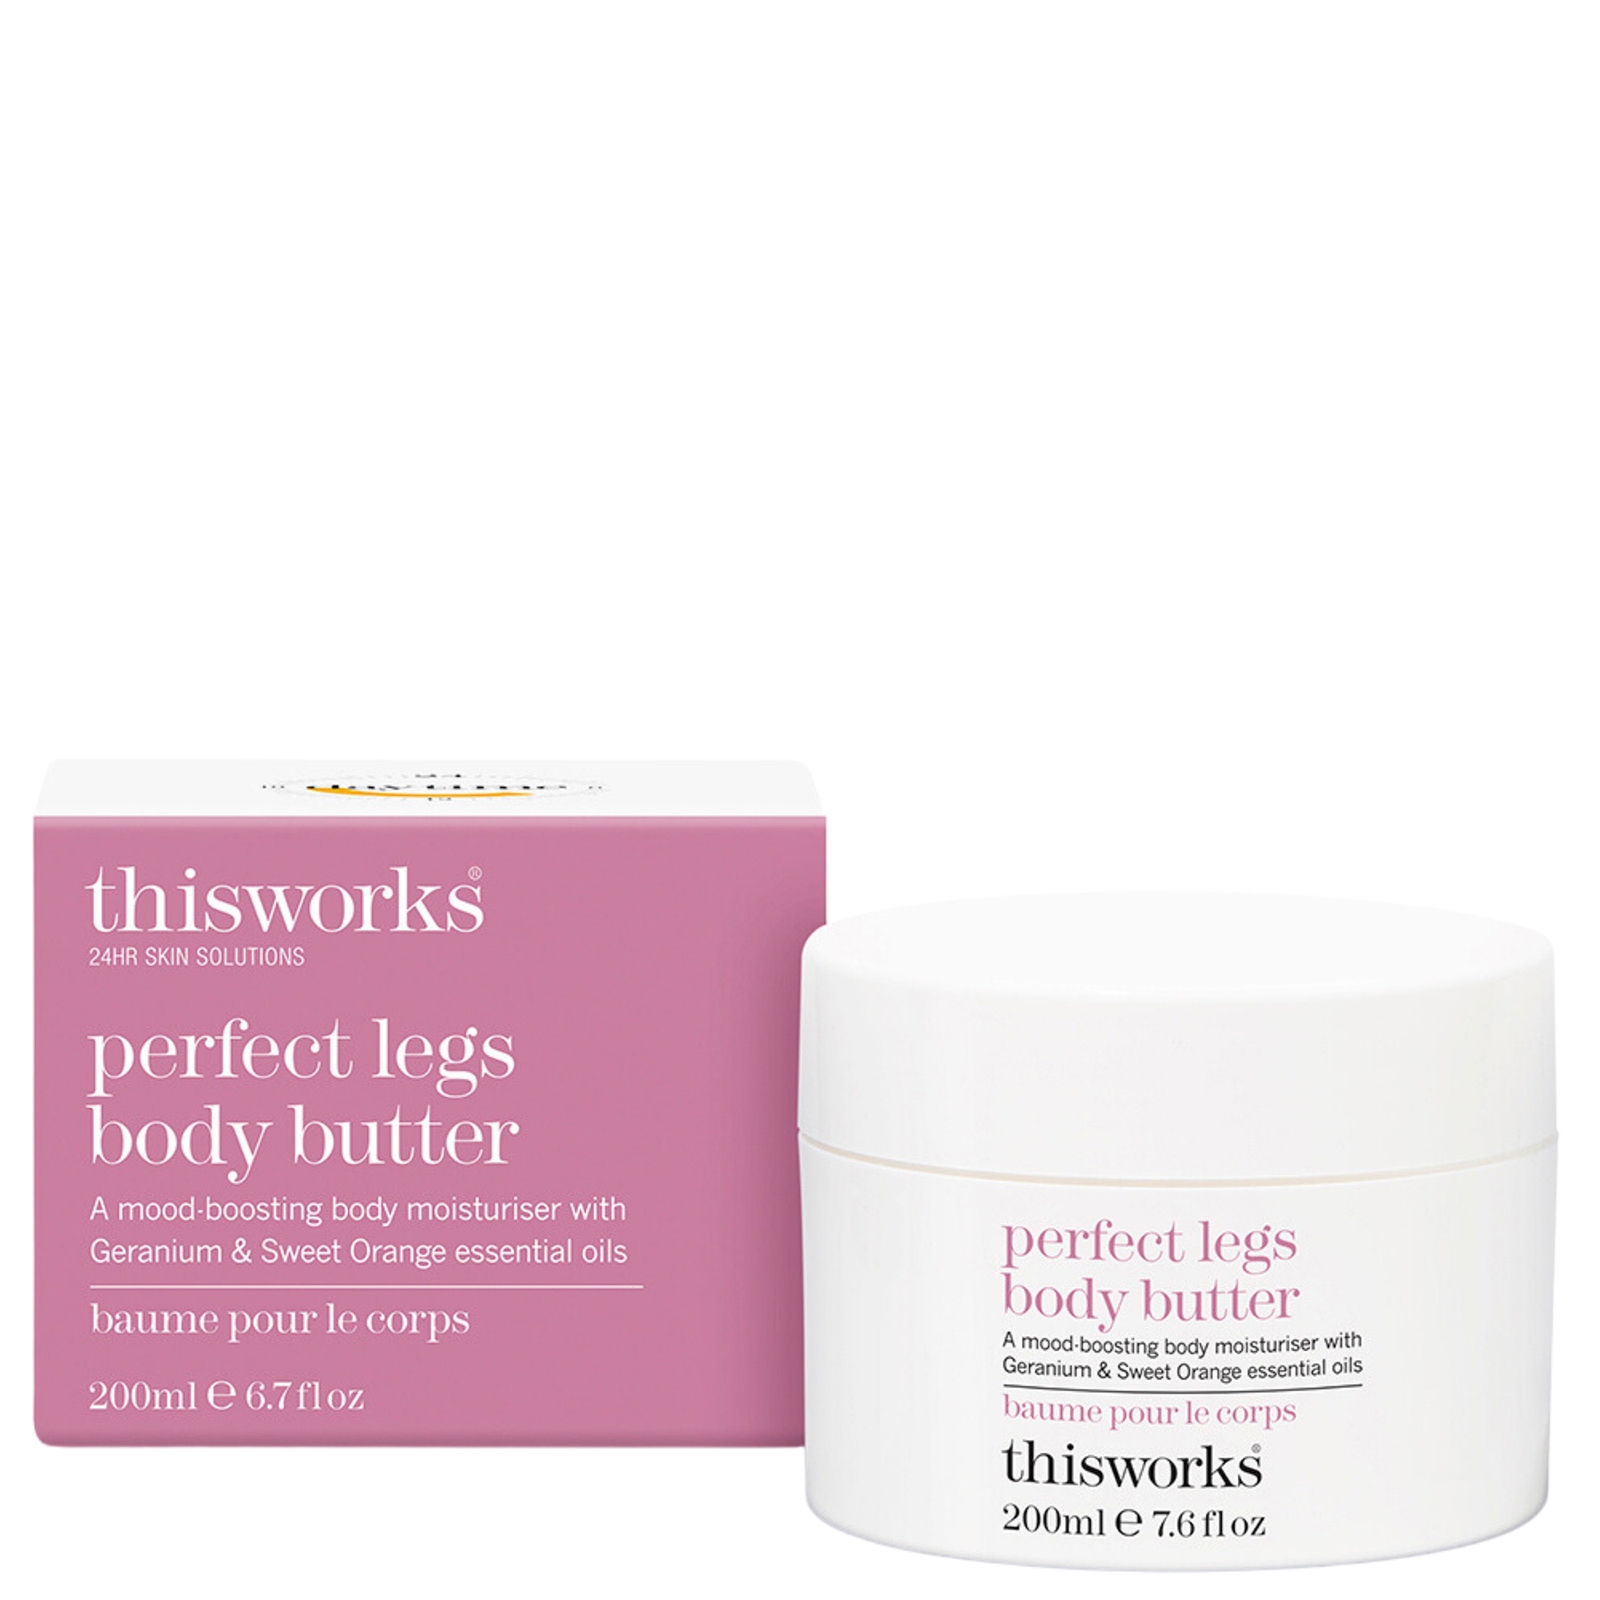 Image of this works Perfect Legs Body Butter 200ml